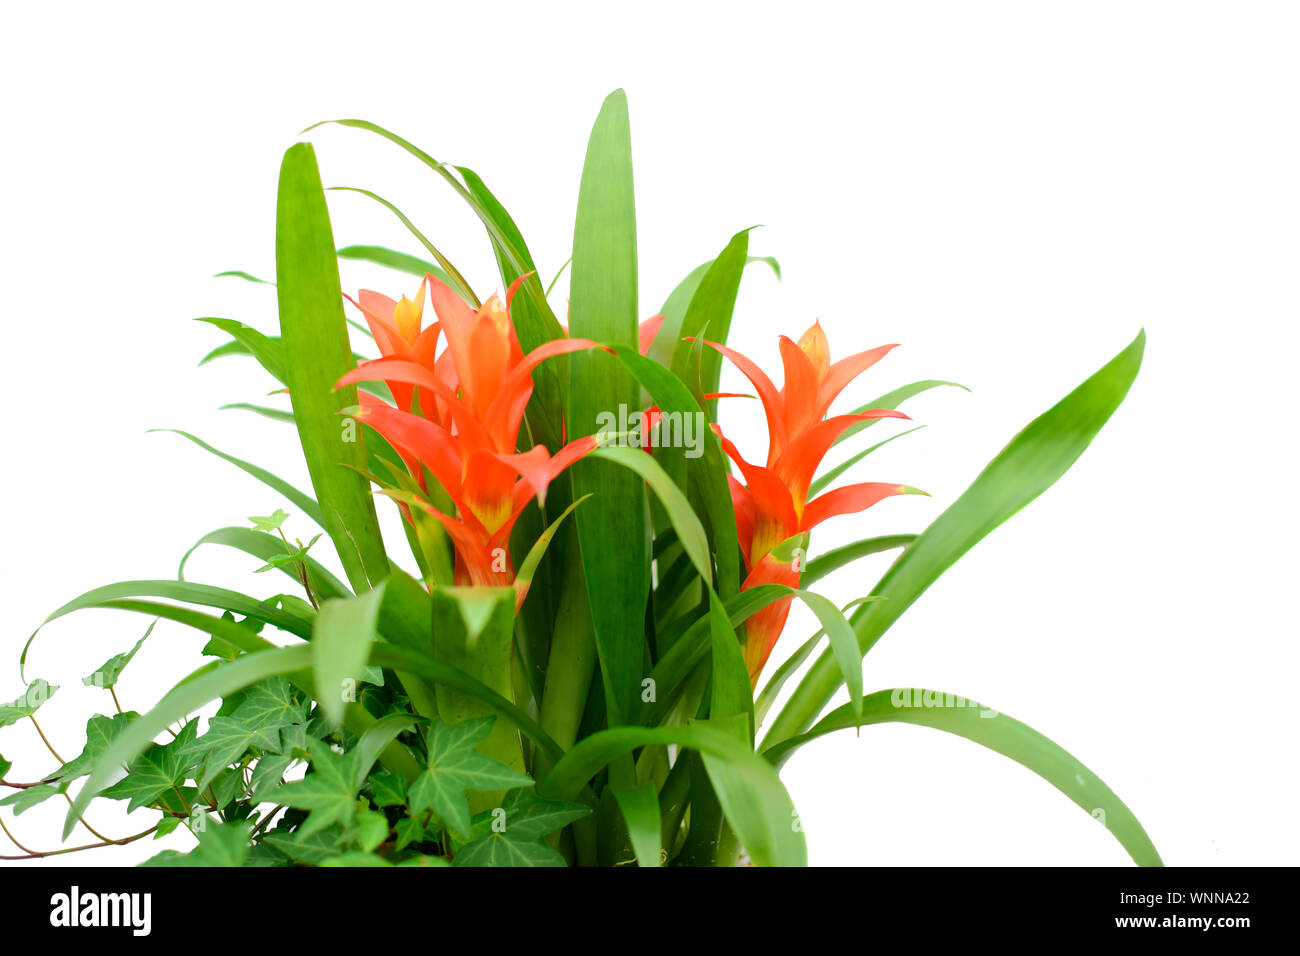 Beautiful orange Canistropsis or Nidularium billbergioides tropical flower with green leaves isolated on white background. Stock Photo